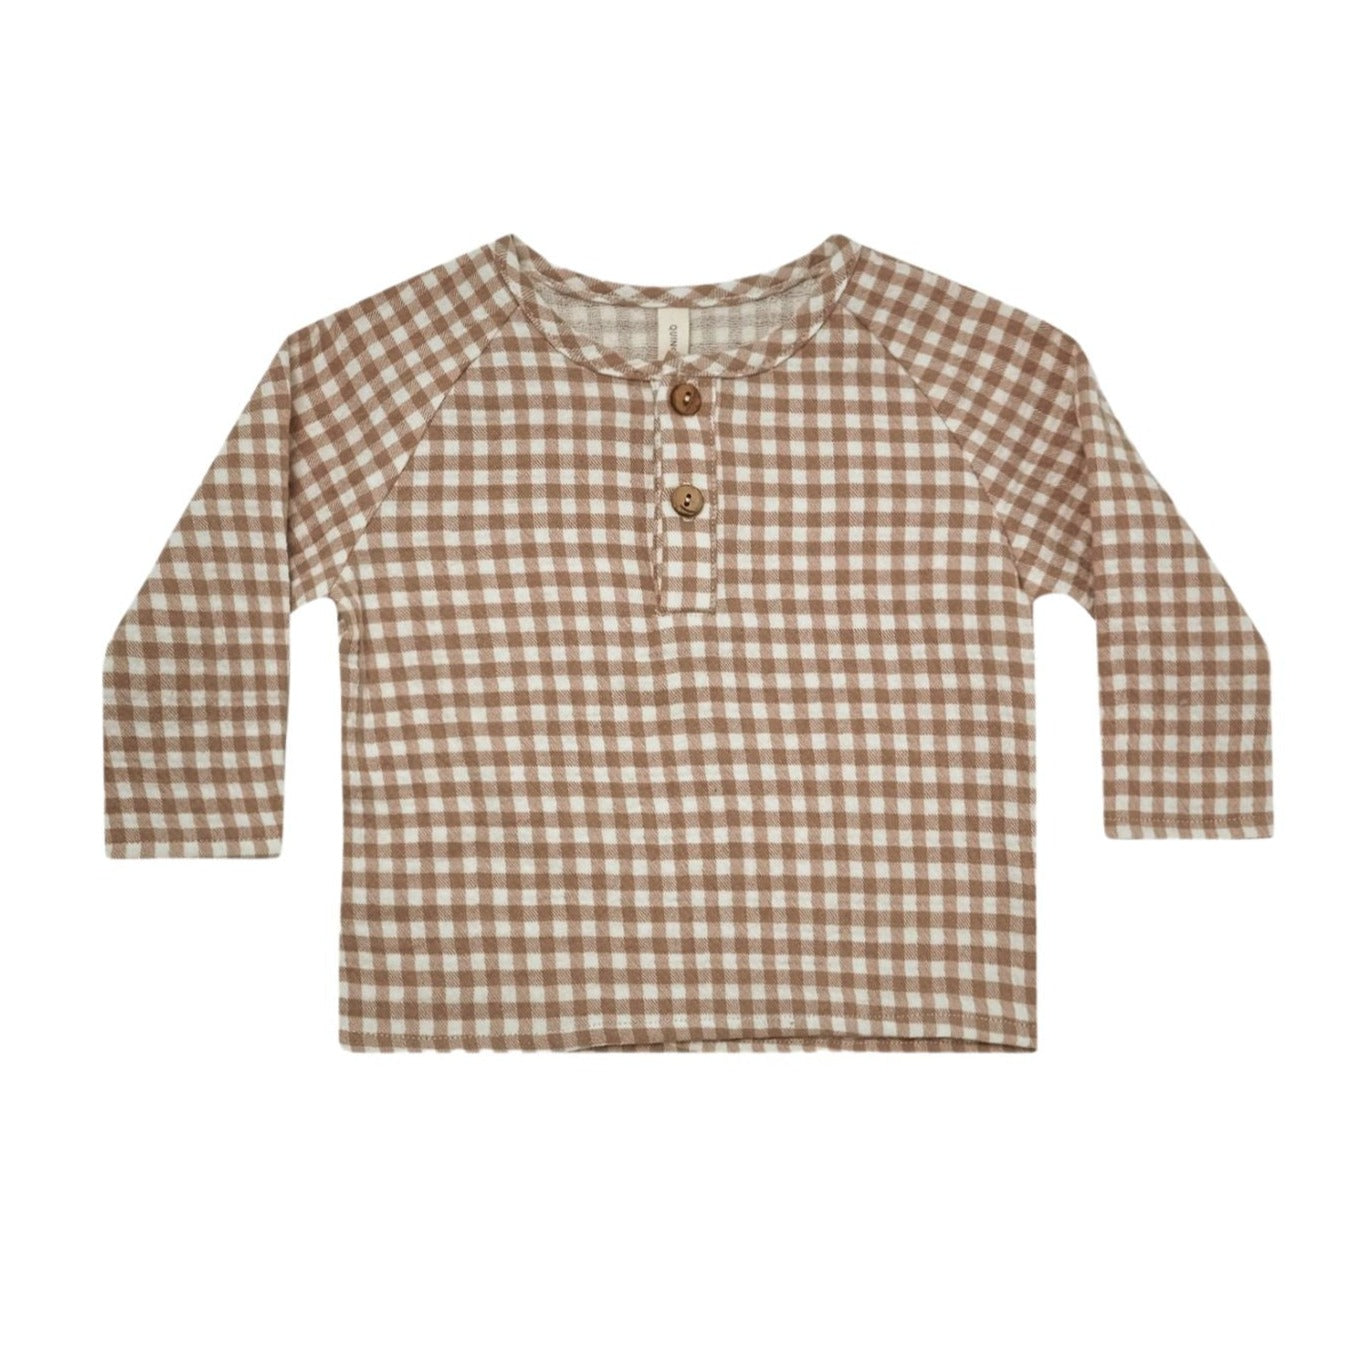 Quincy Mae Zion Shirt - Cocoa Gingham